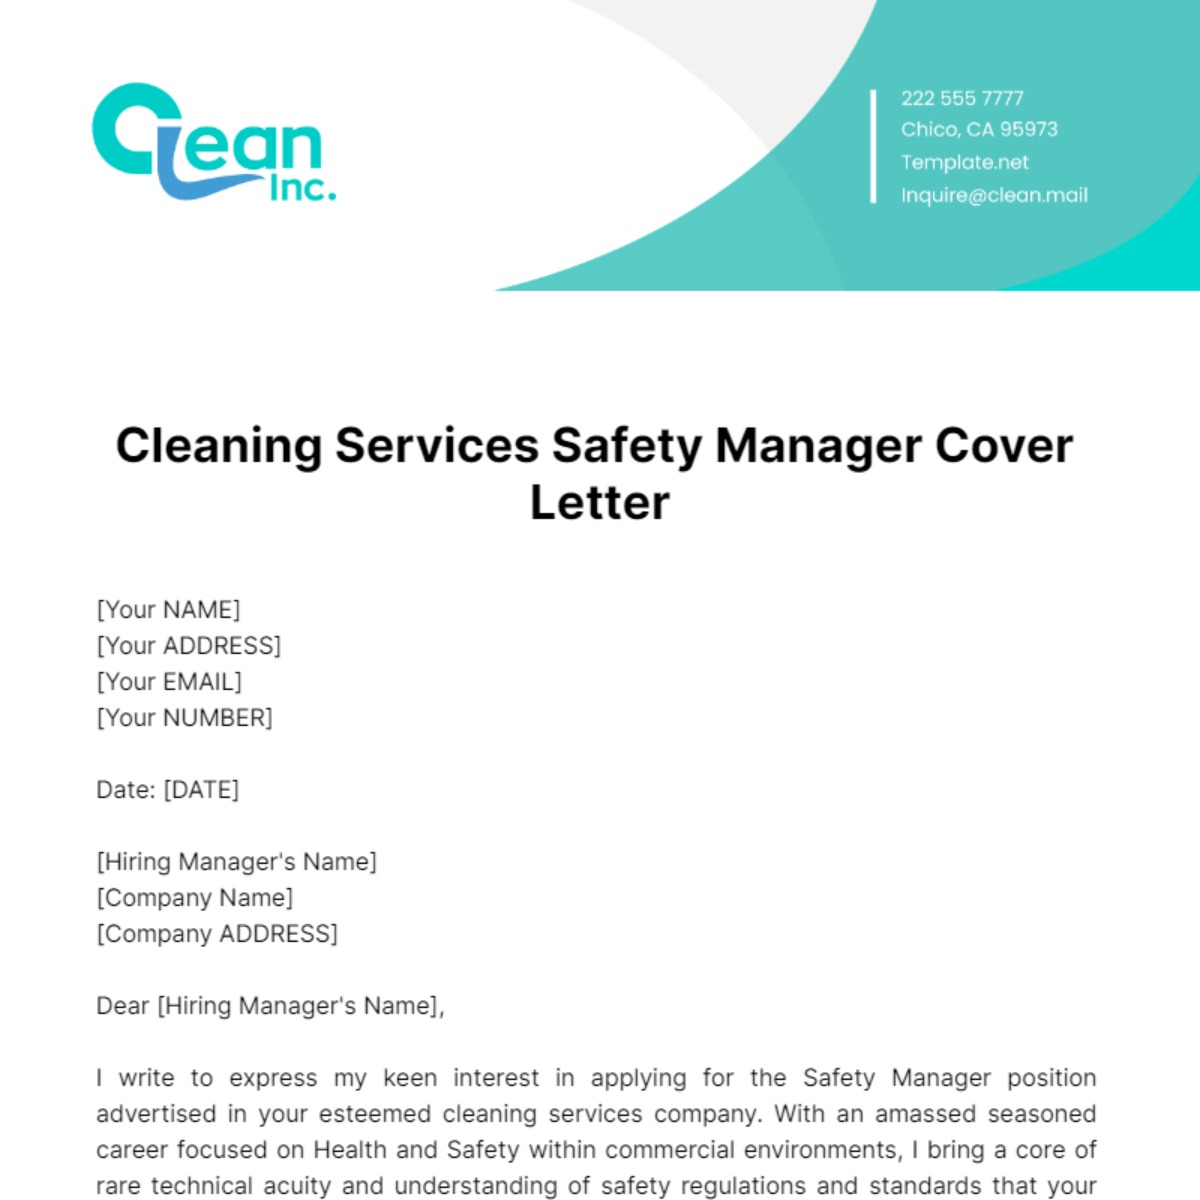 Cleaning Services Safety Manager Cover Letter Template